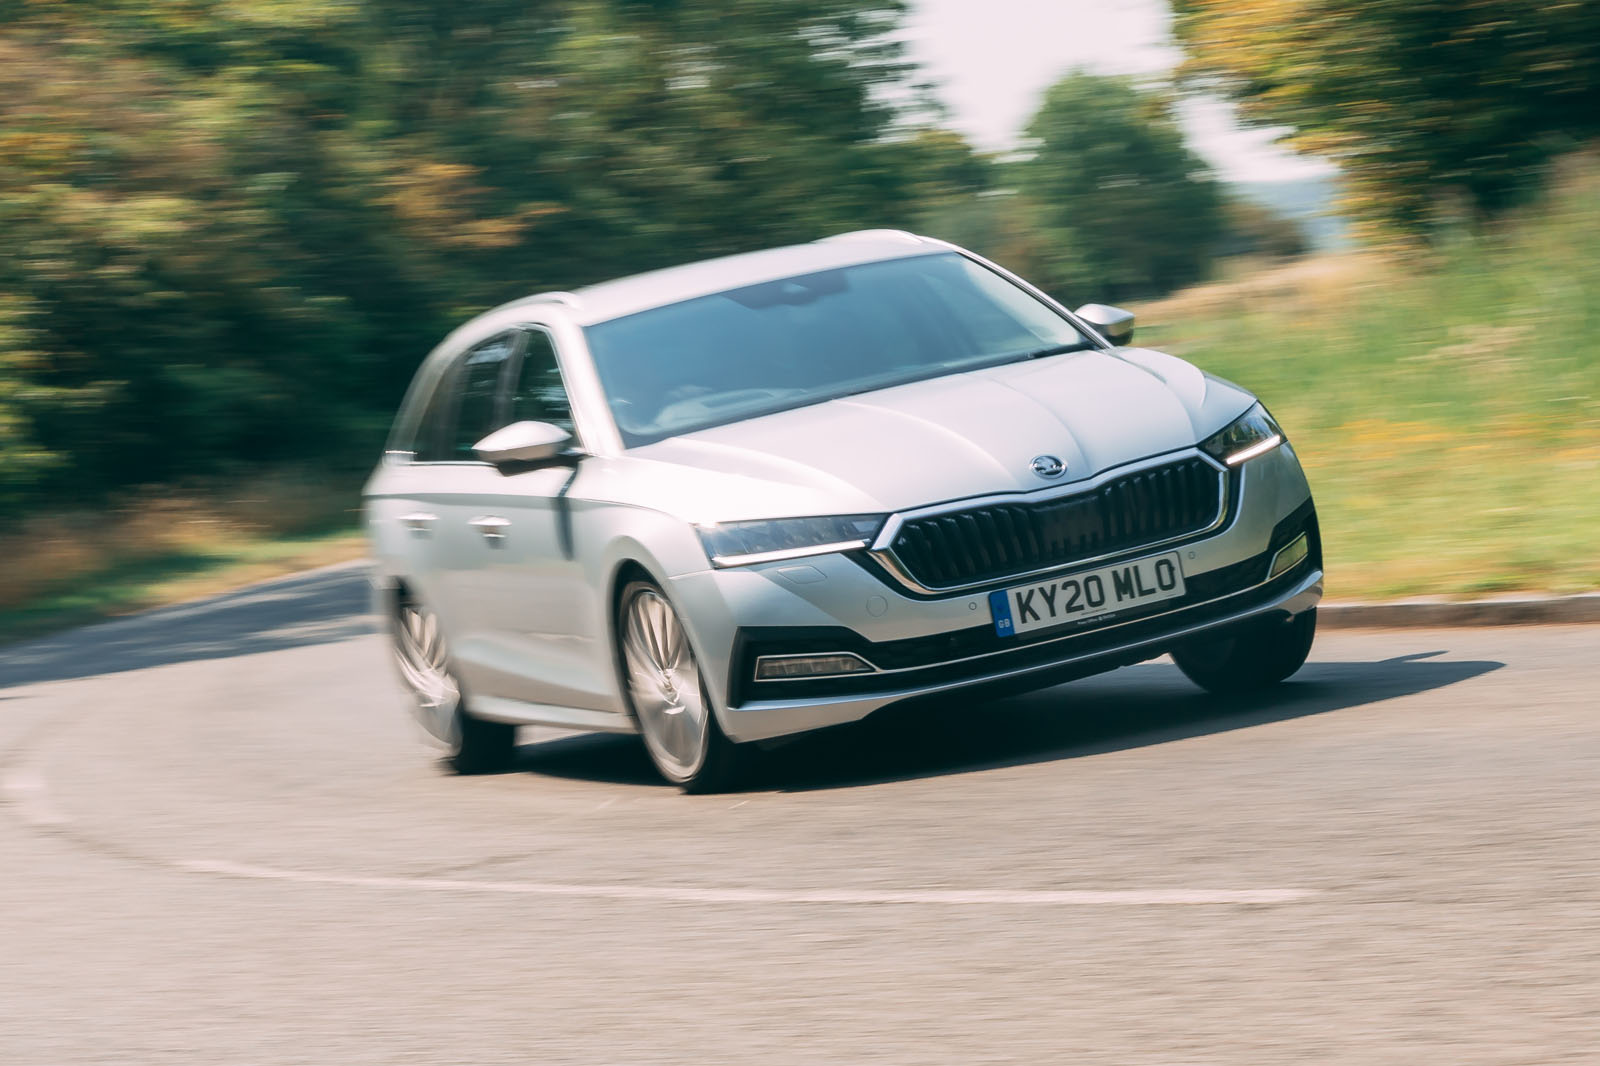 Skoda Octavia Estate 2020 road test review - on the road front